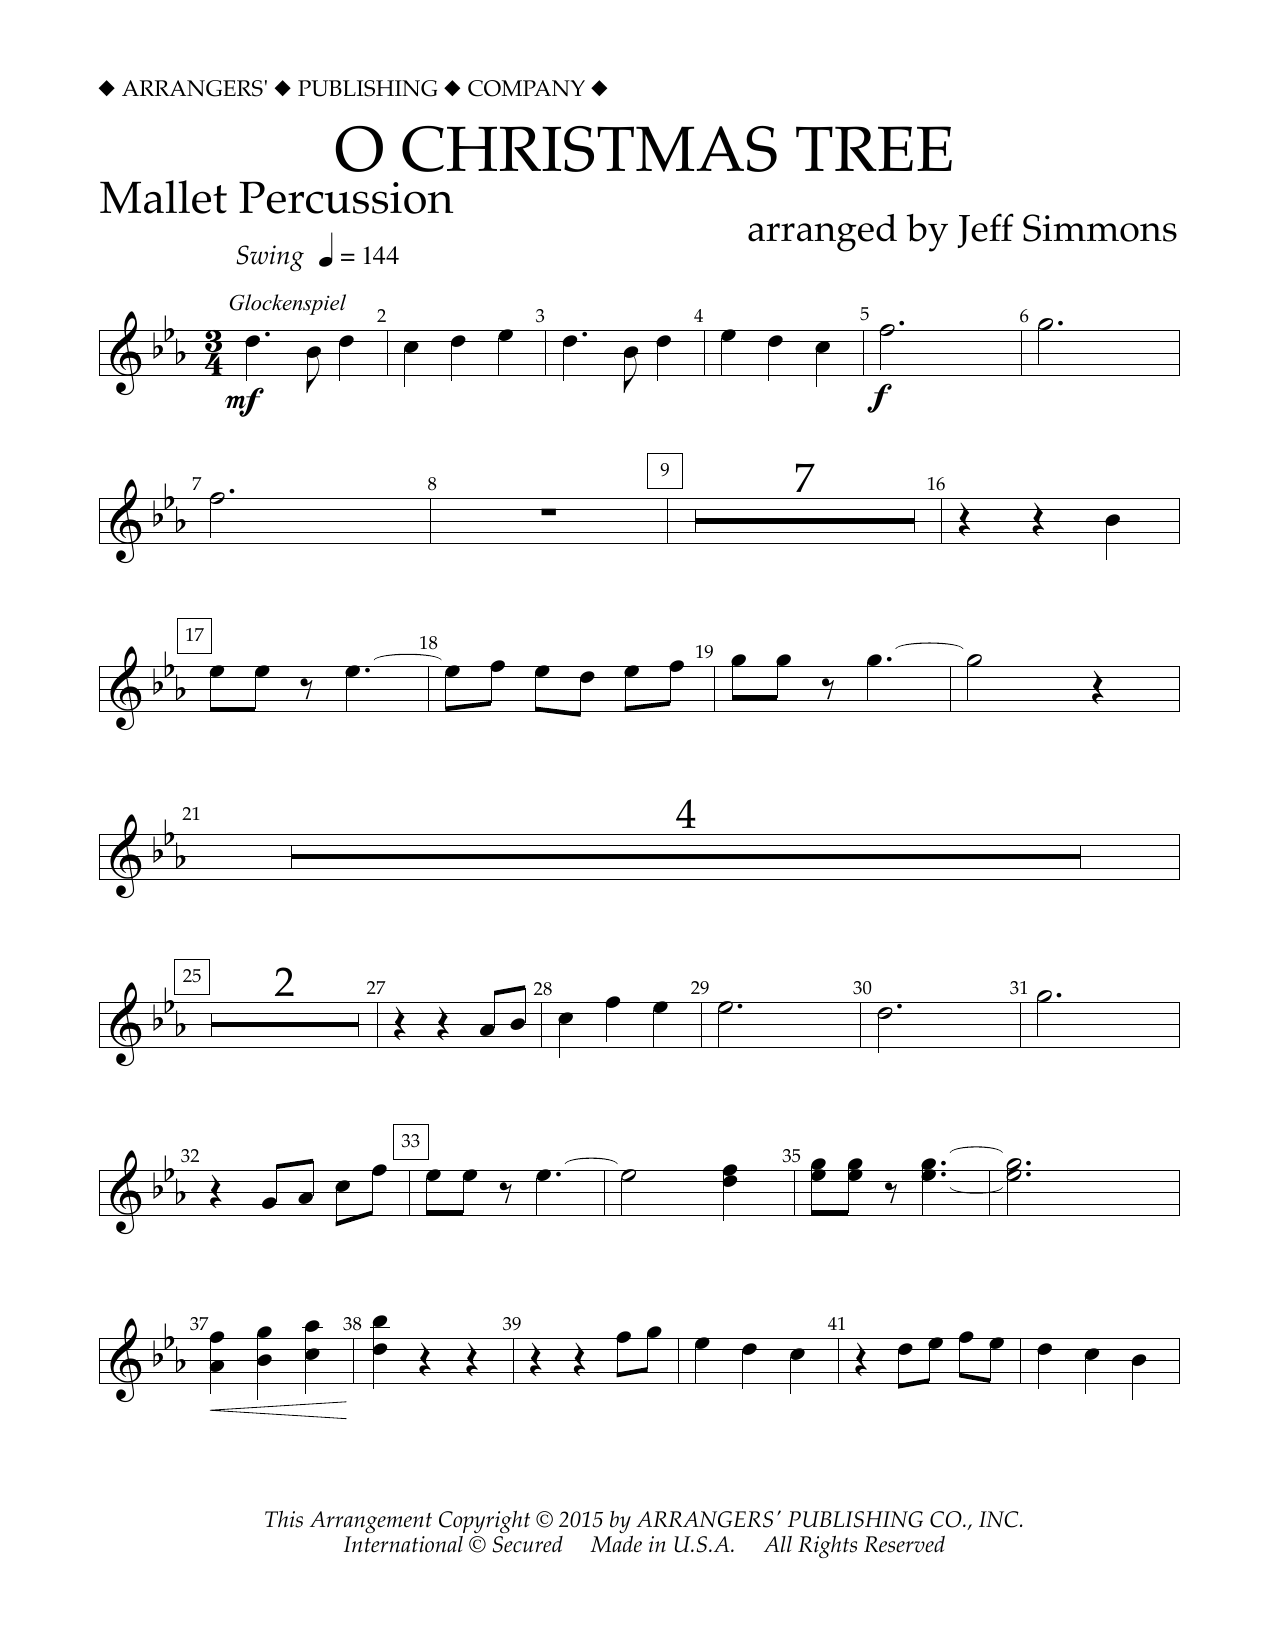 Download Jeff Simmons O Christmas Tree - Mallet Percussion Sheet Music